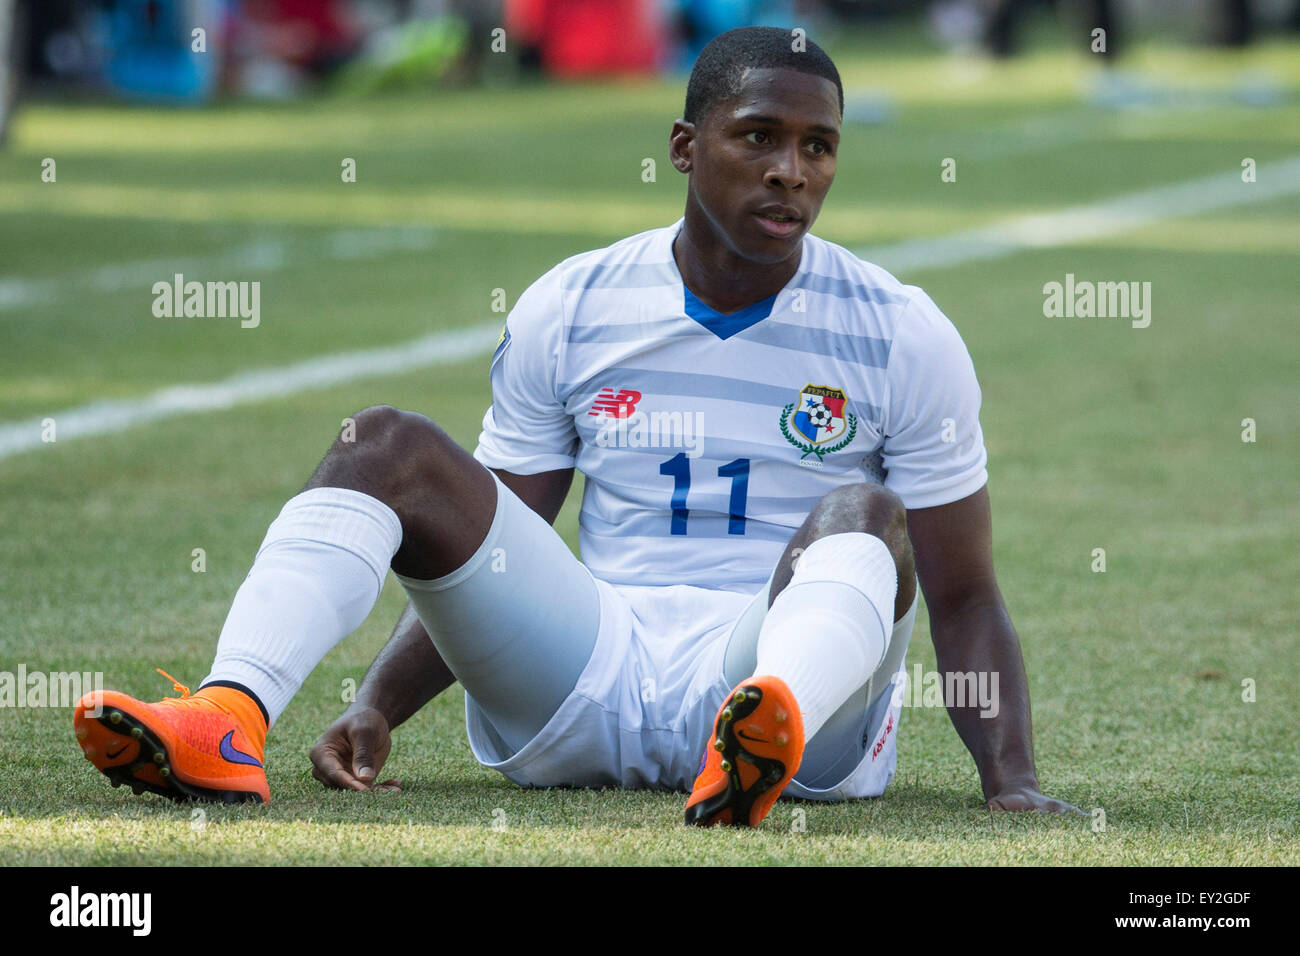 The Match By Shootout. 19th July, 2015. Panama midfielder Armando Cooper (11) looks on from the ground during the CONCACAF Gold Cup 2015 Quarterfinal match between the Trinidad & Tobago and Panama at MetLife Stadium in East Rutherford, New Jersey. Panama won the match by shootout. (Christopher Szagola/Cal Sport Media) © csm/Alamy Live News Stock Photo